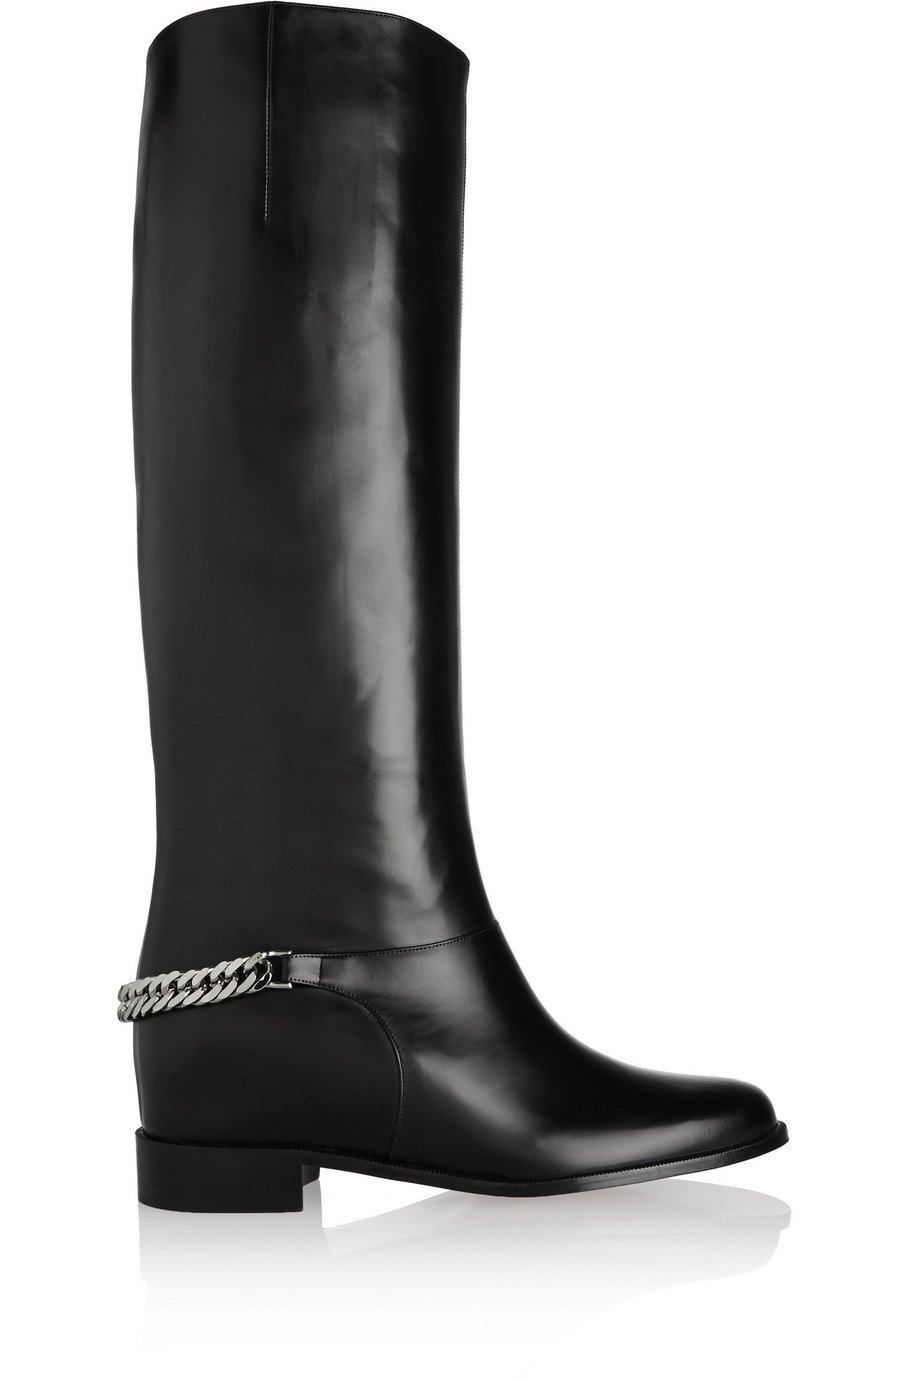 Christian Louboutin Cate Chain-Trimmed Leather Riding Boots in Black | Lyst